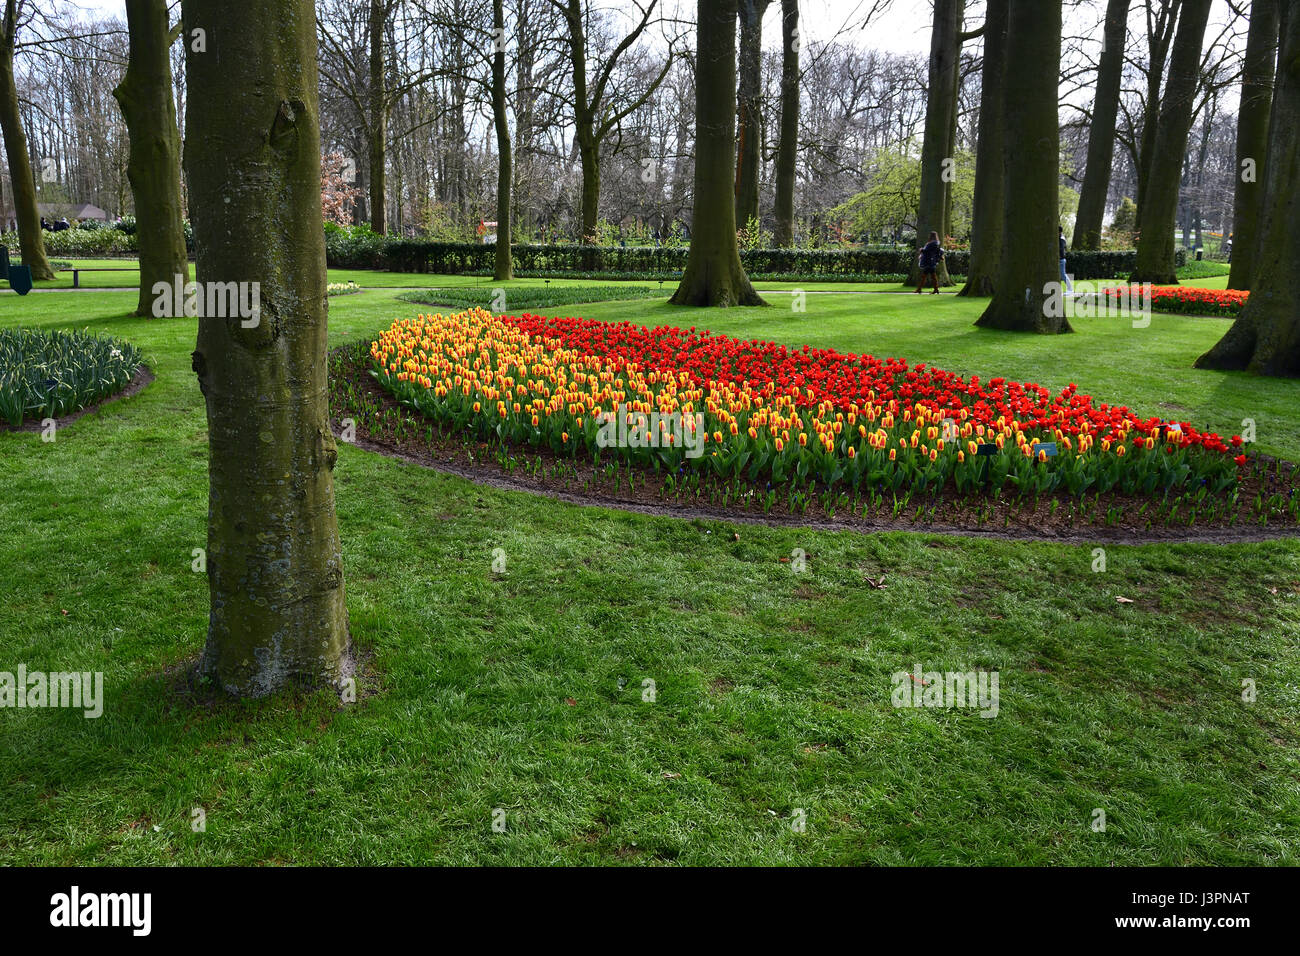 garden of various color tulips in wooded setting Stock Photo